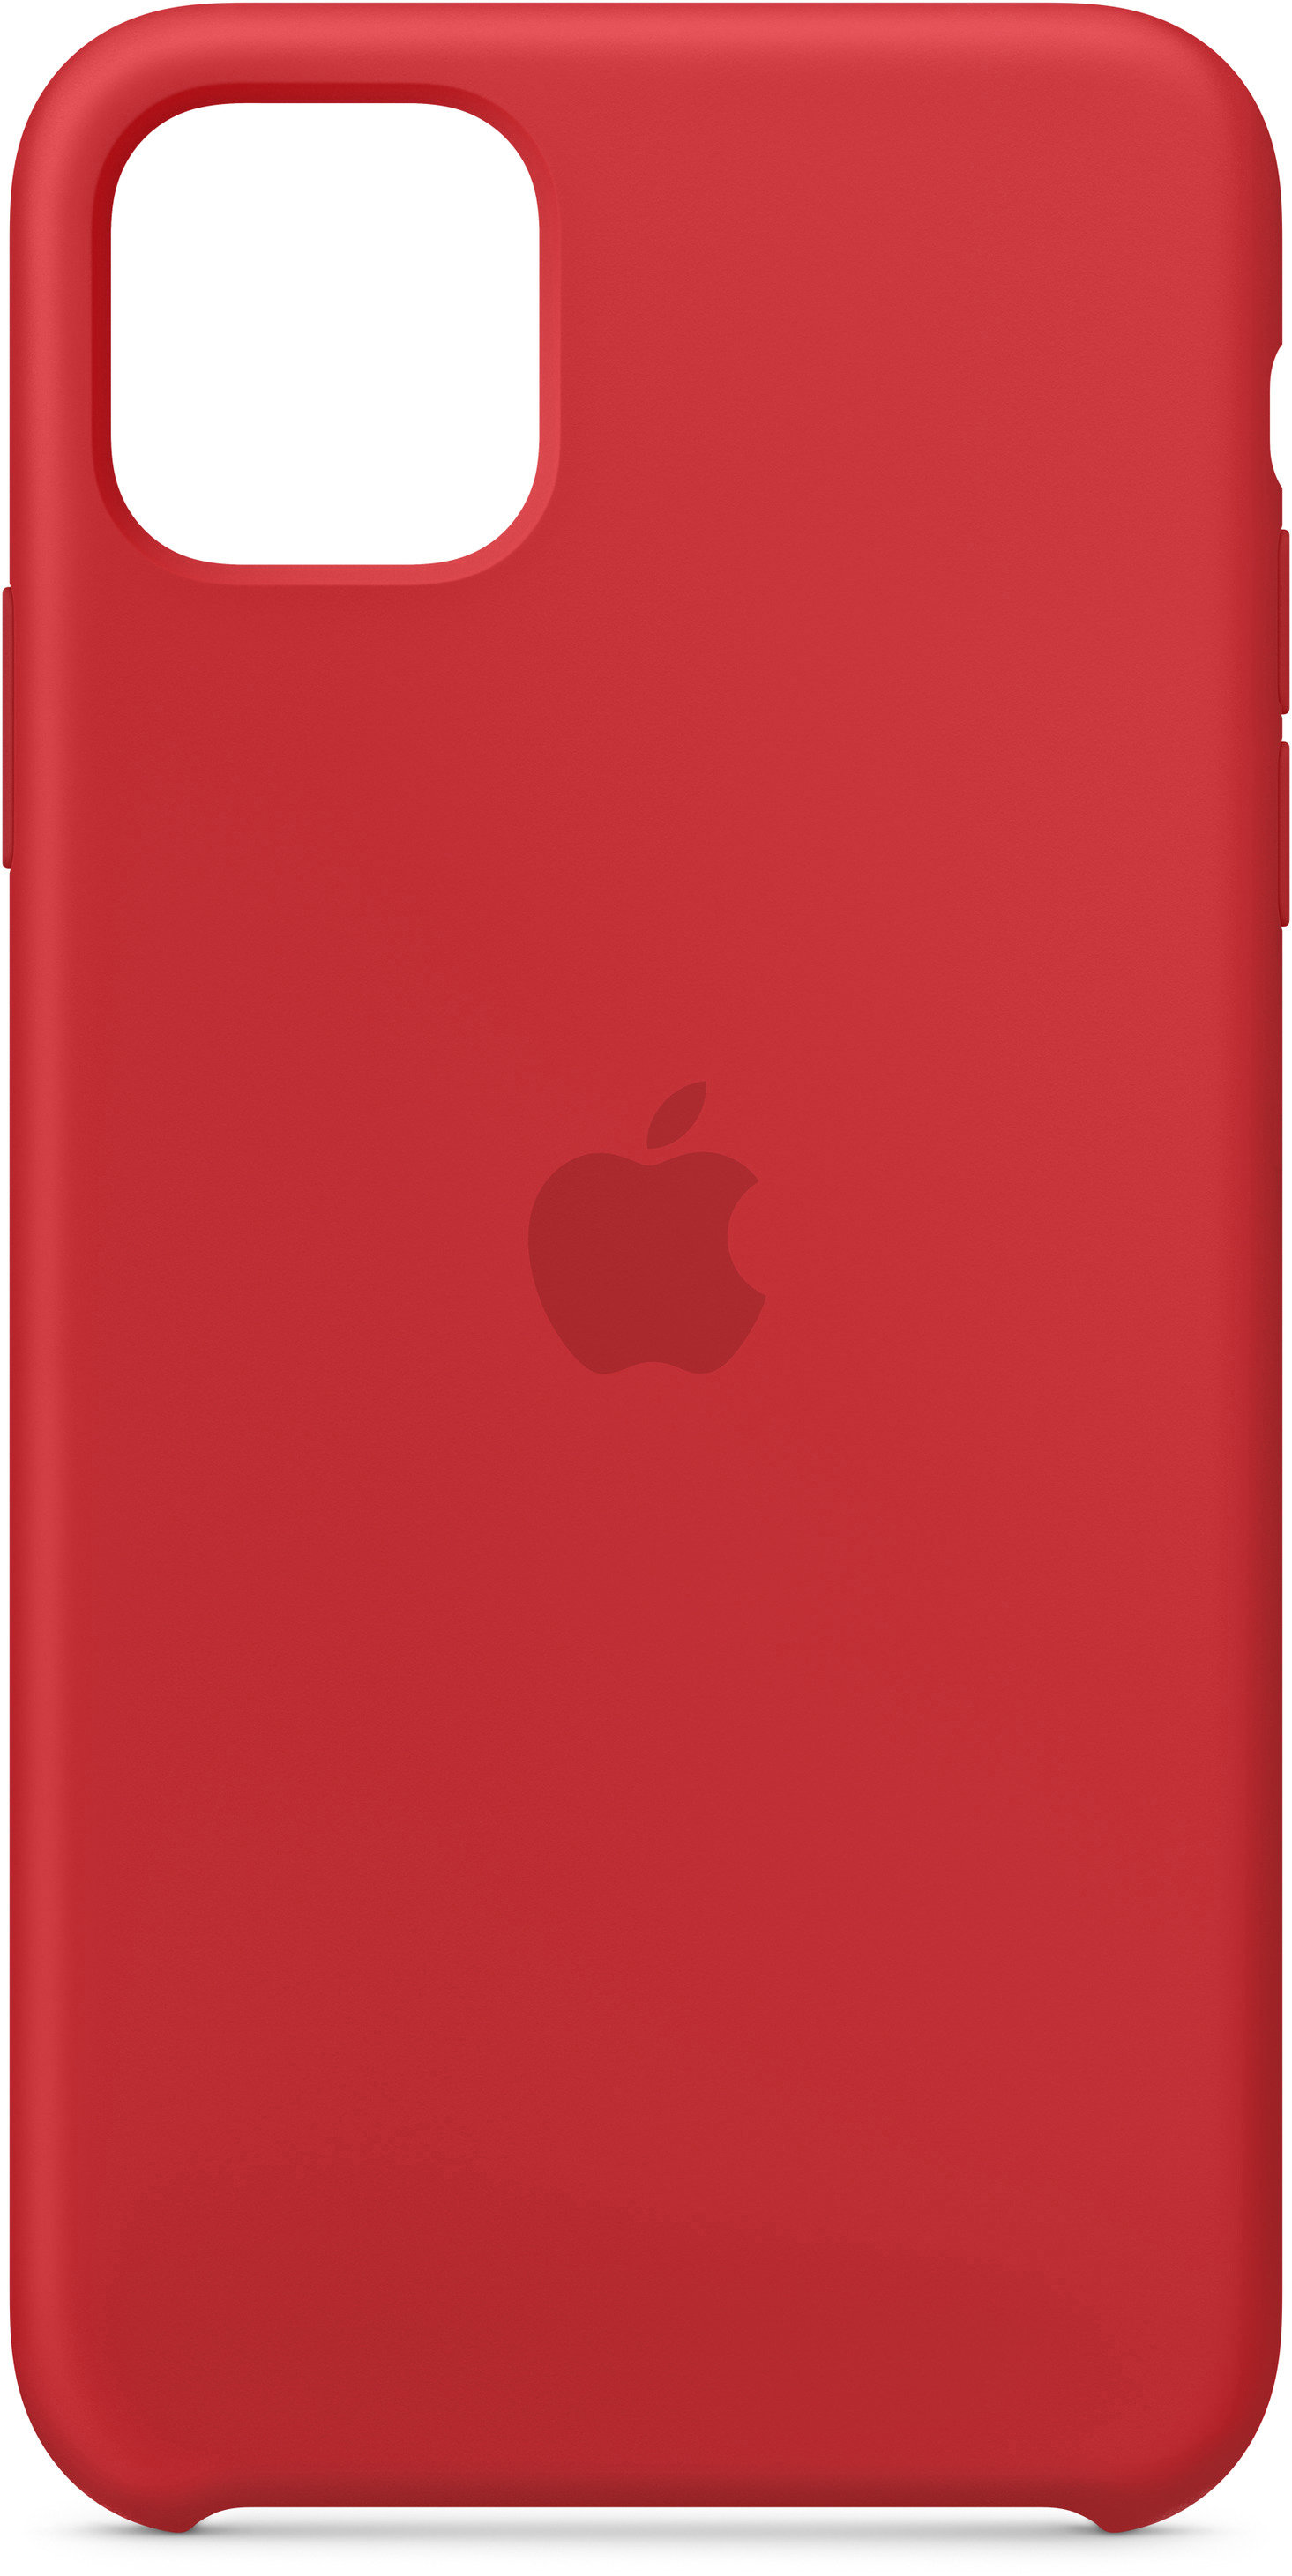 APPLE Silicone Case, Apple, iPhone 11 Pro Max, Backcover, Rot